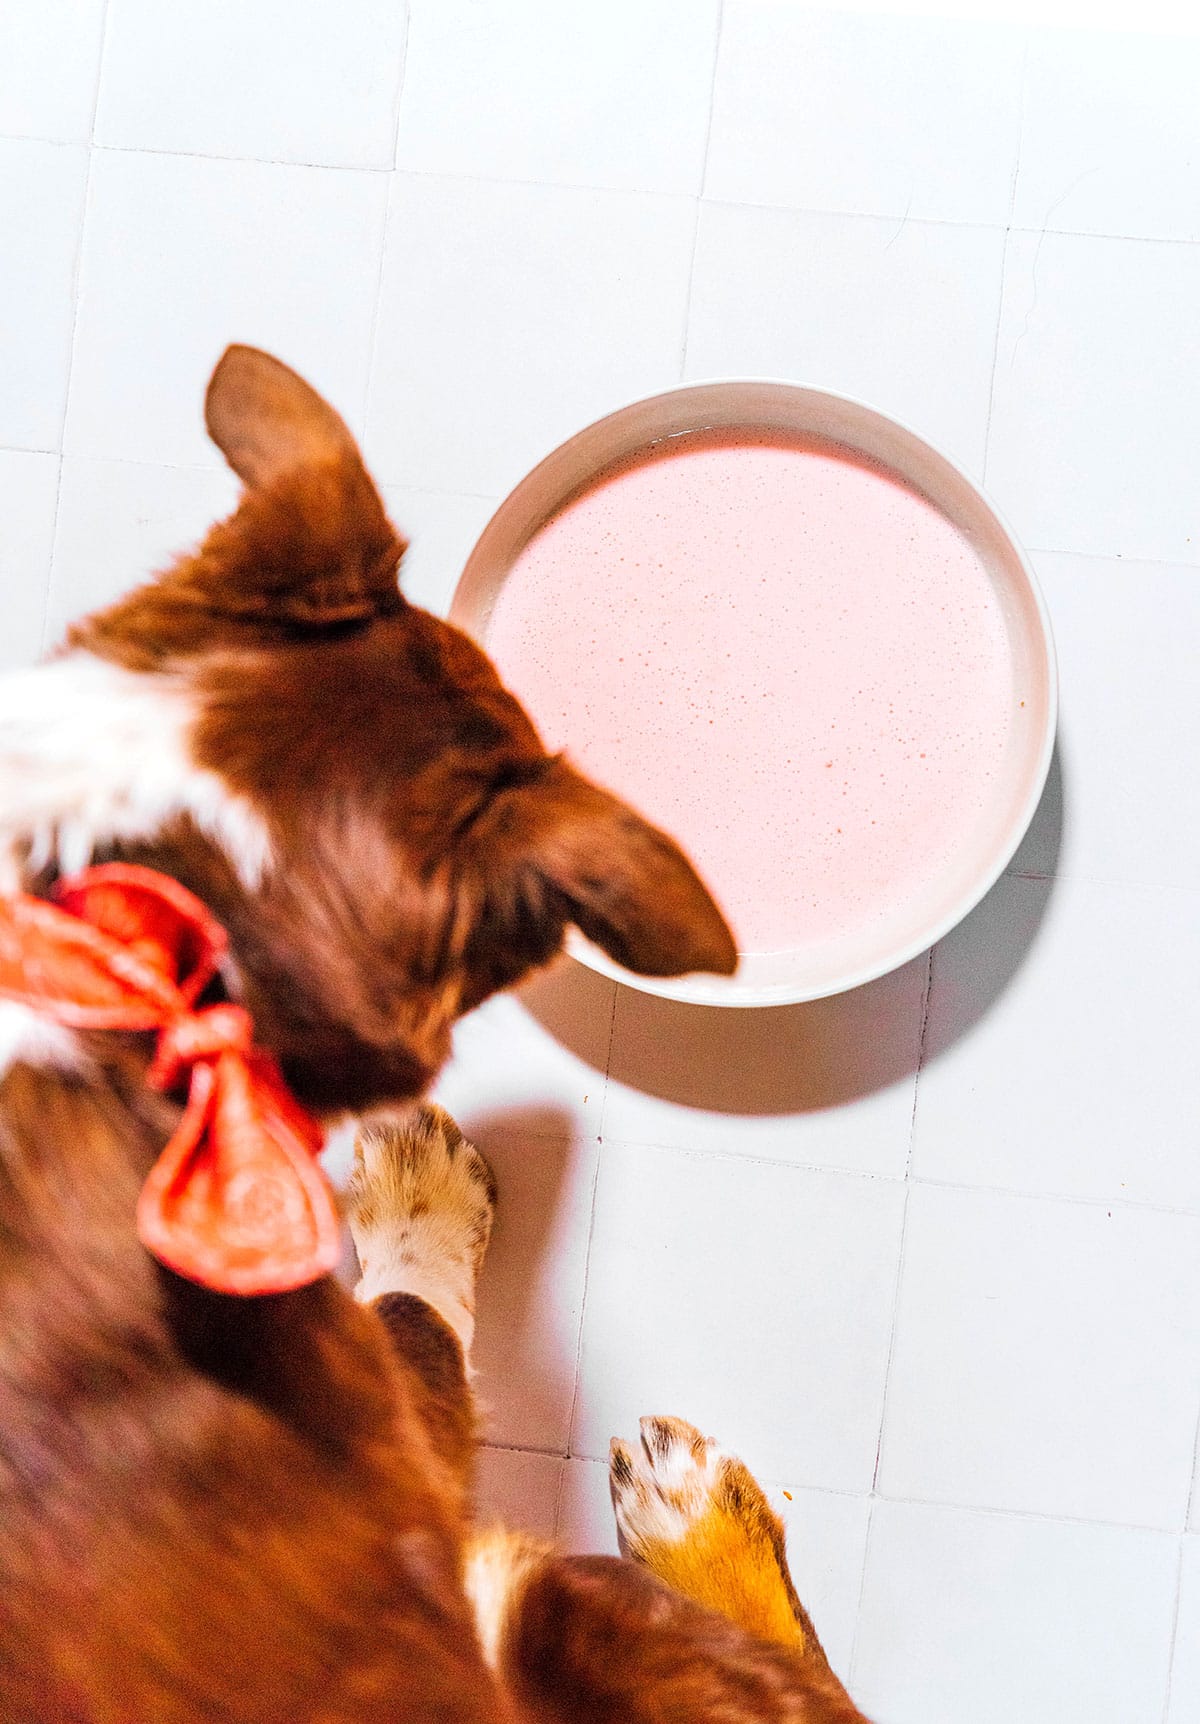 A brown and white dog lapping up a bowl of strawberry kefir.